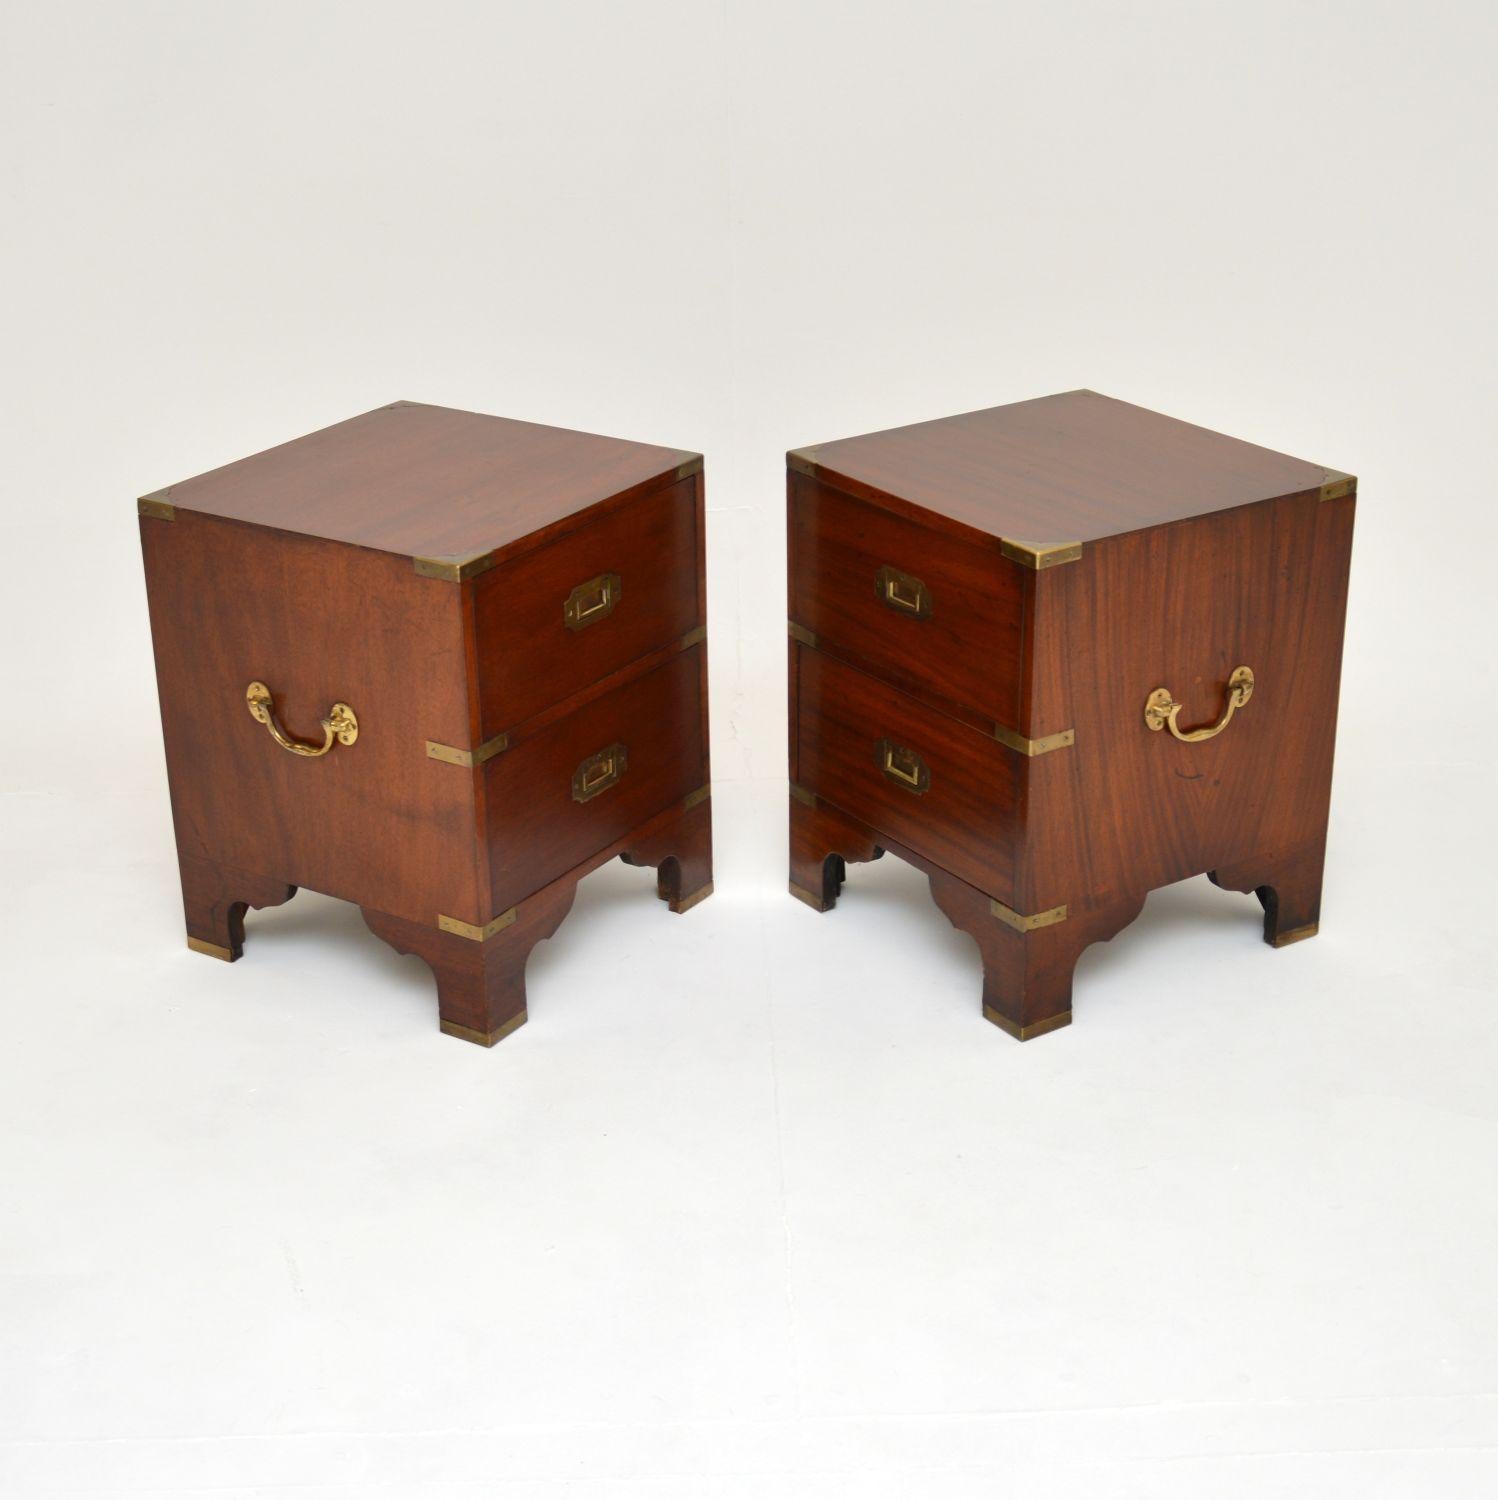 British Pair of Antique Military Campaign Bedside Chests